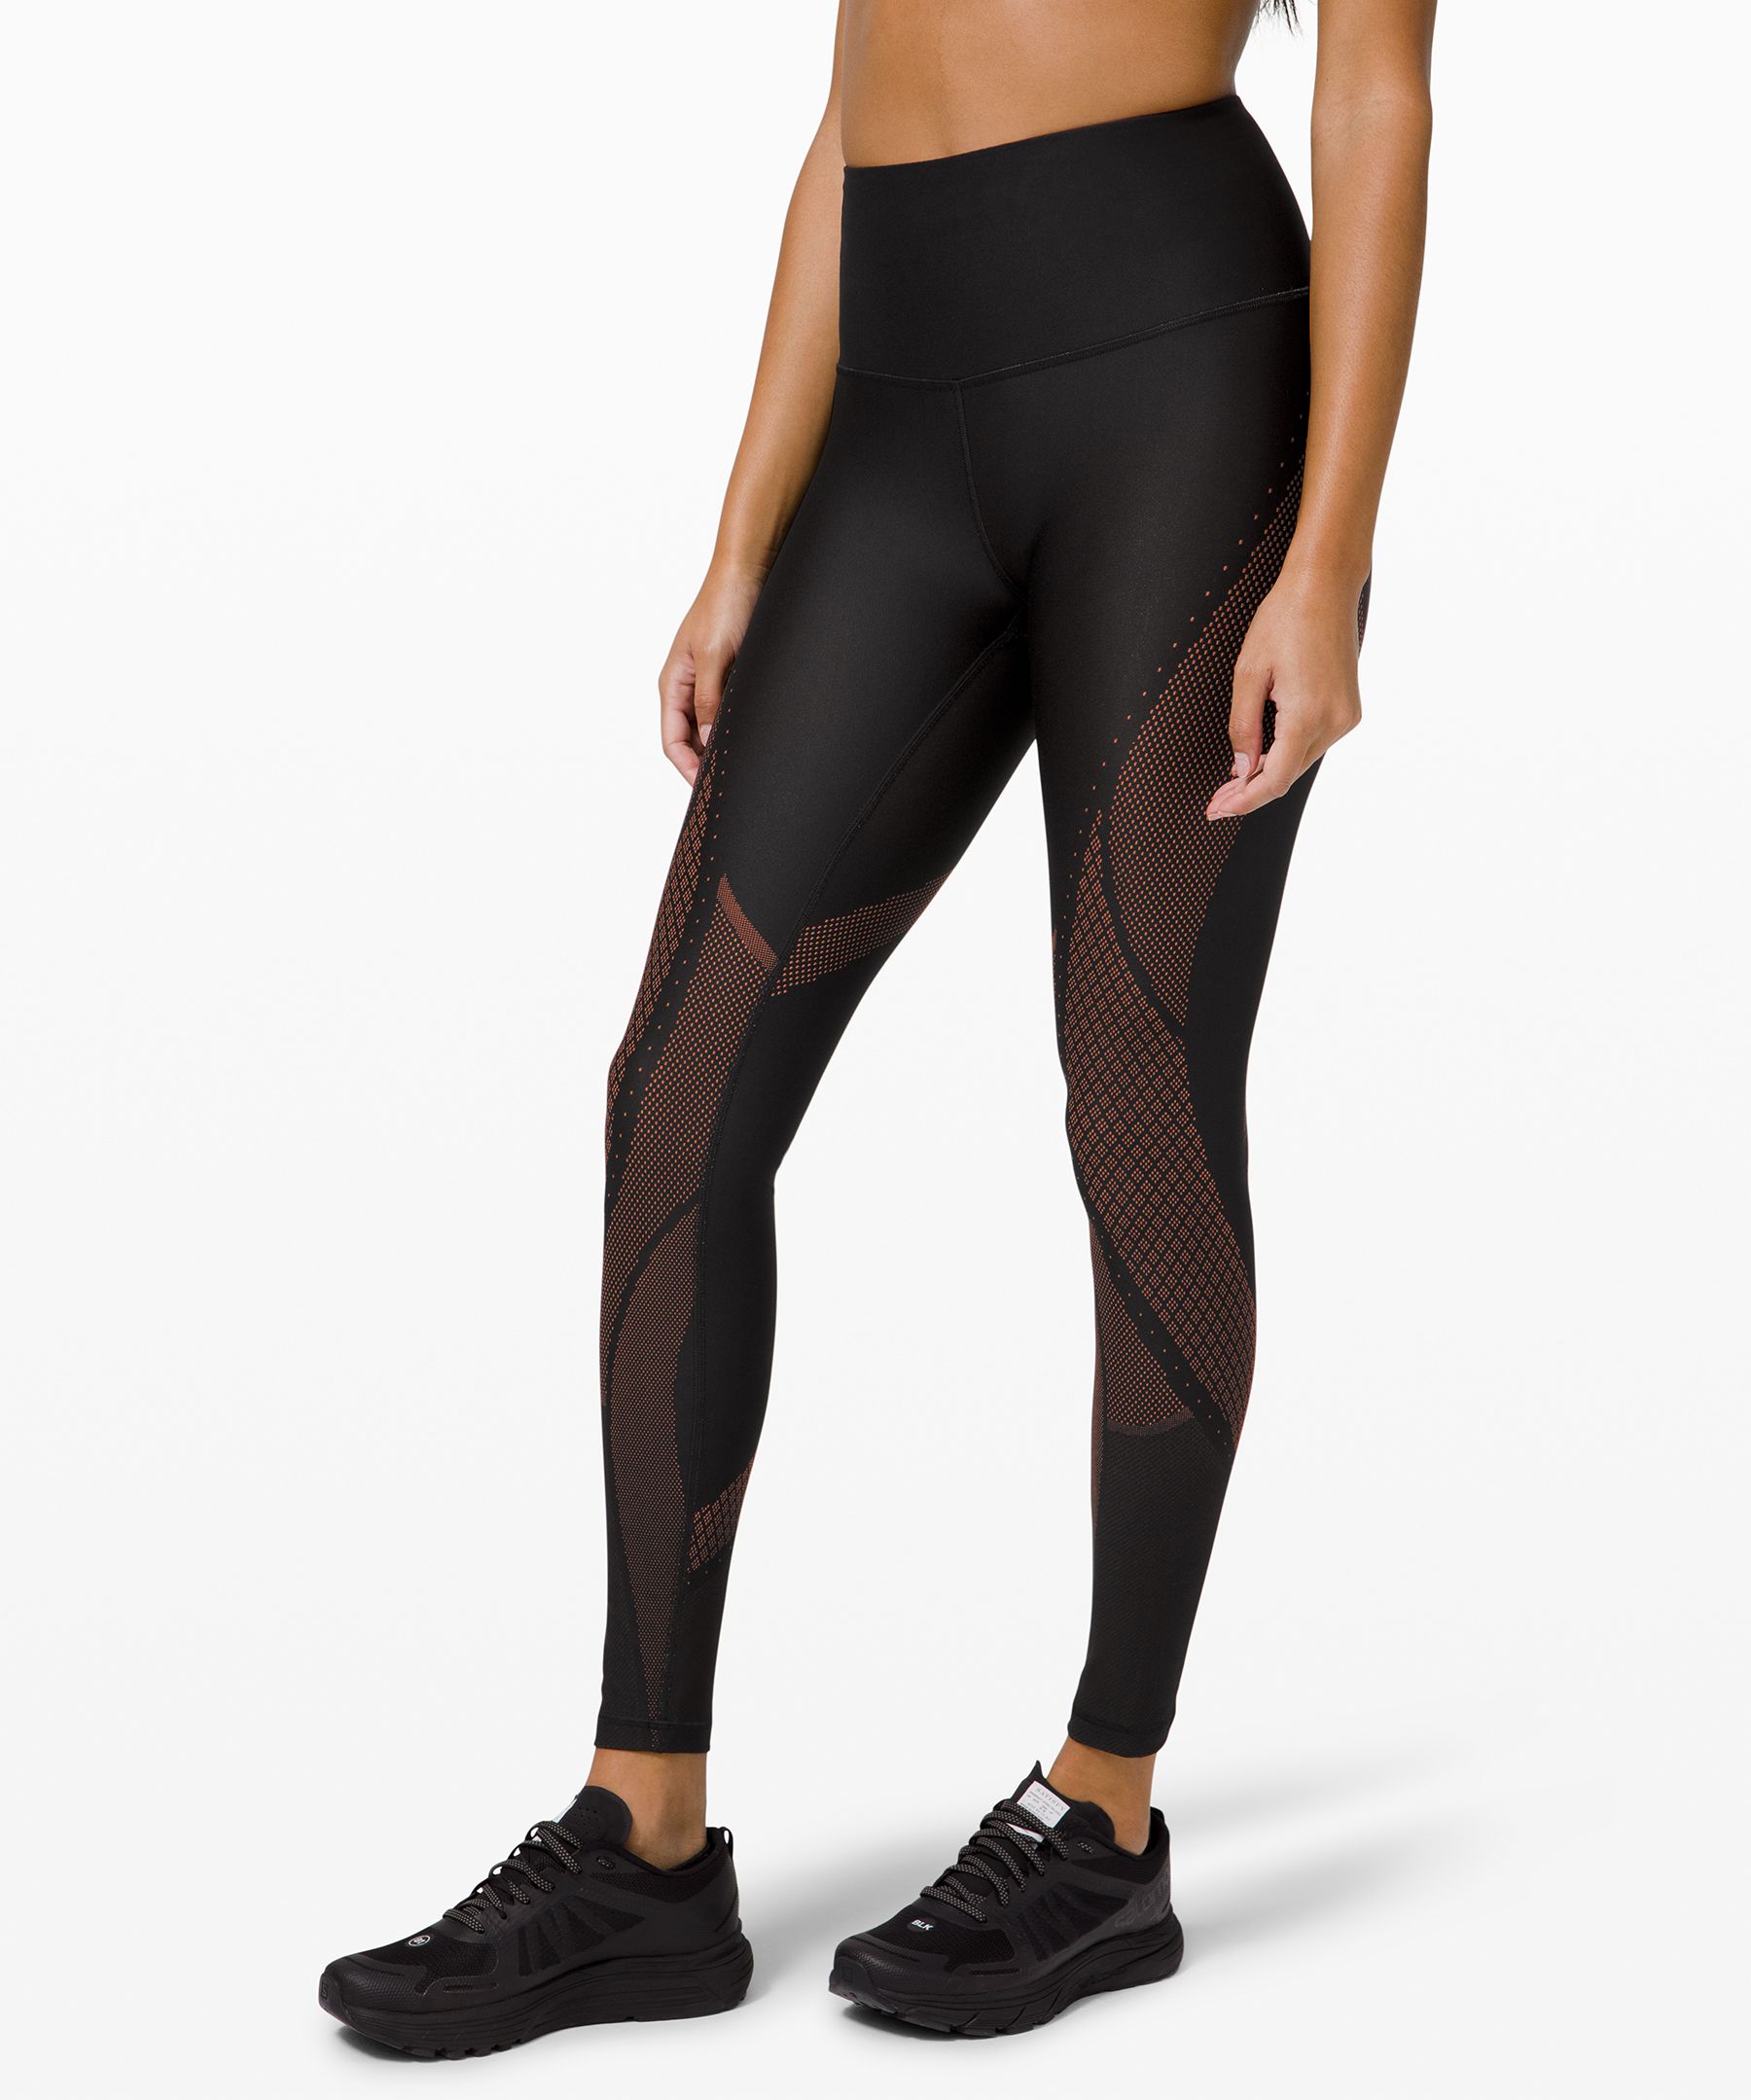 LULULEMON MAPPED OUT HIGH RISE TIGHT 28 *CAMO BLACK SIZE 8